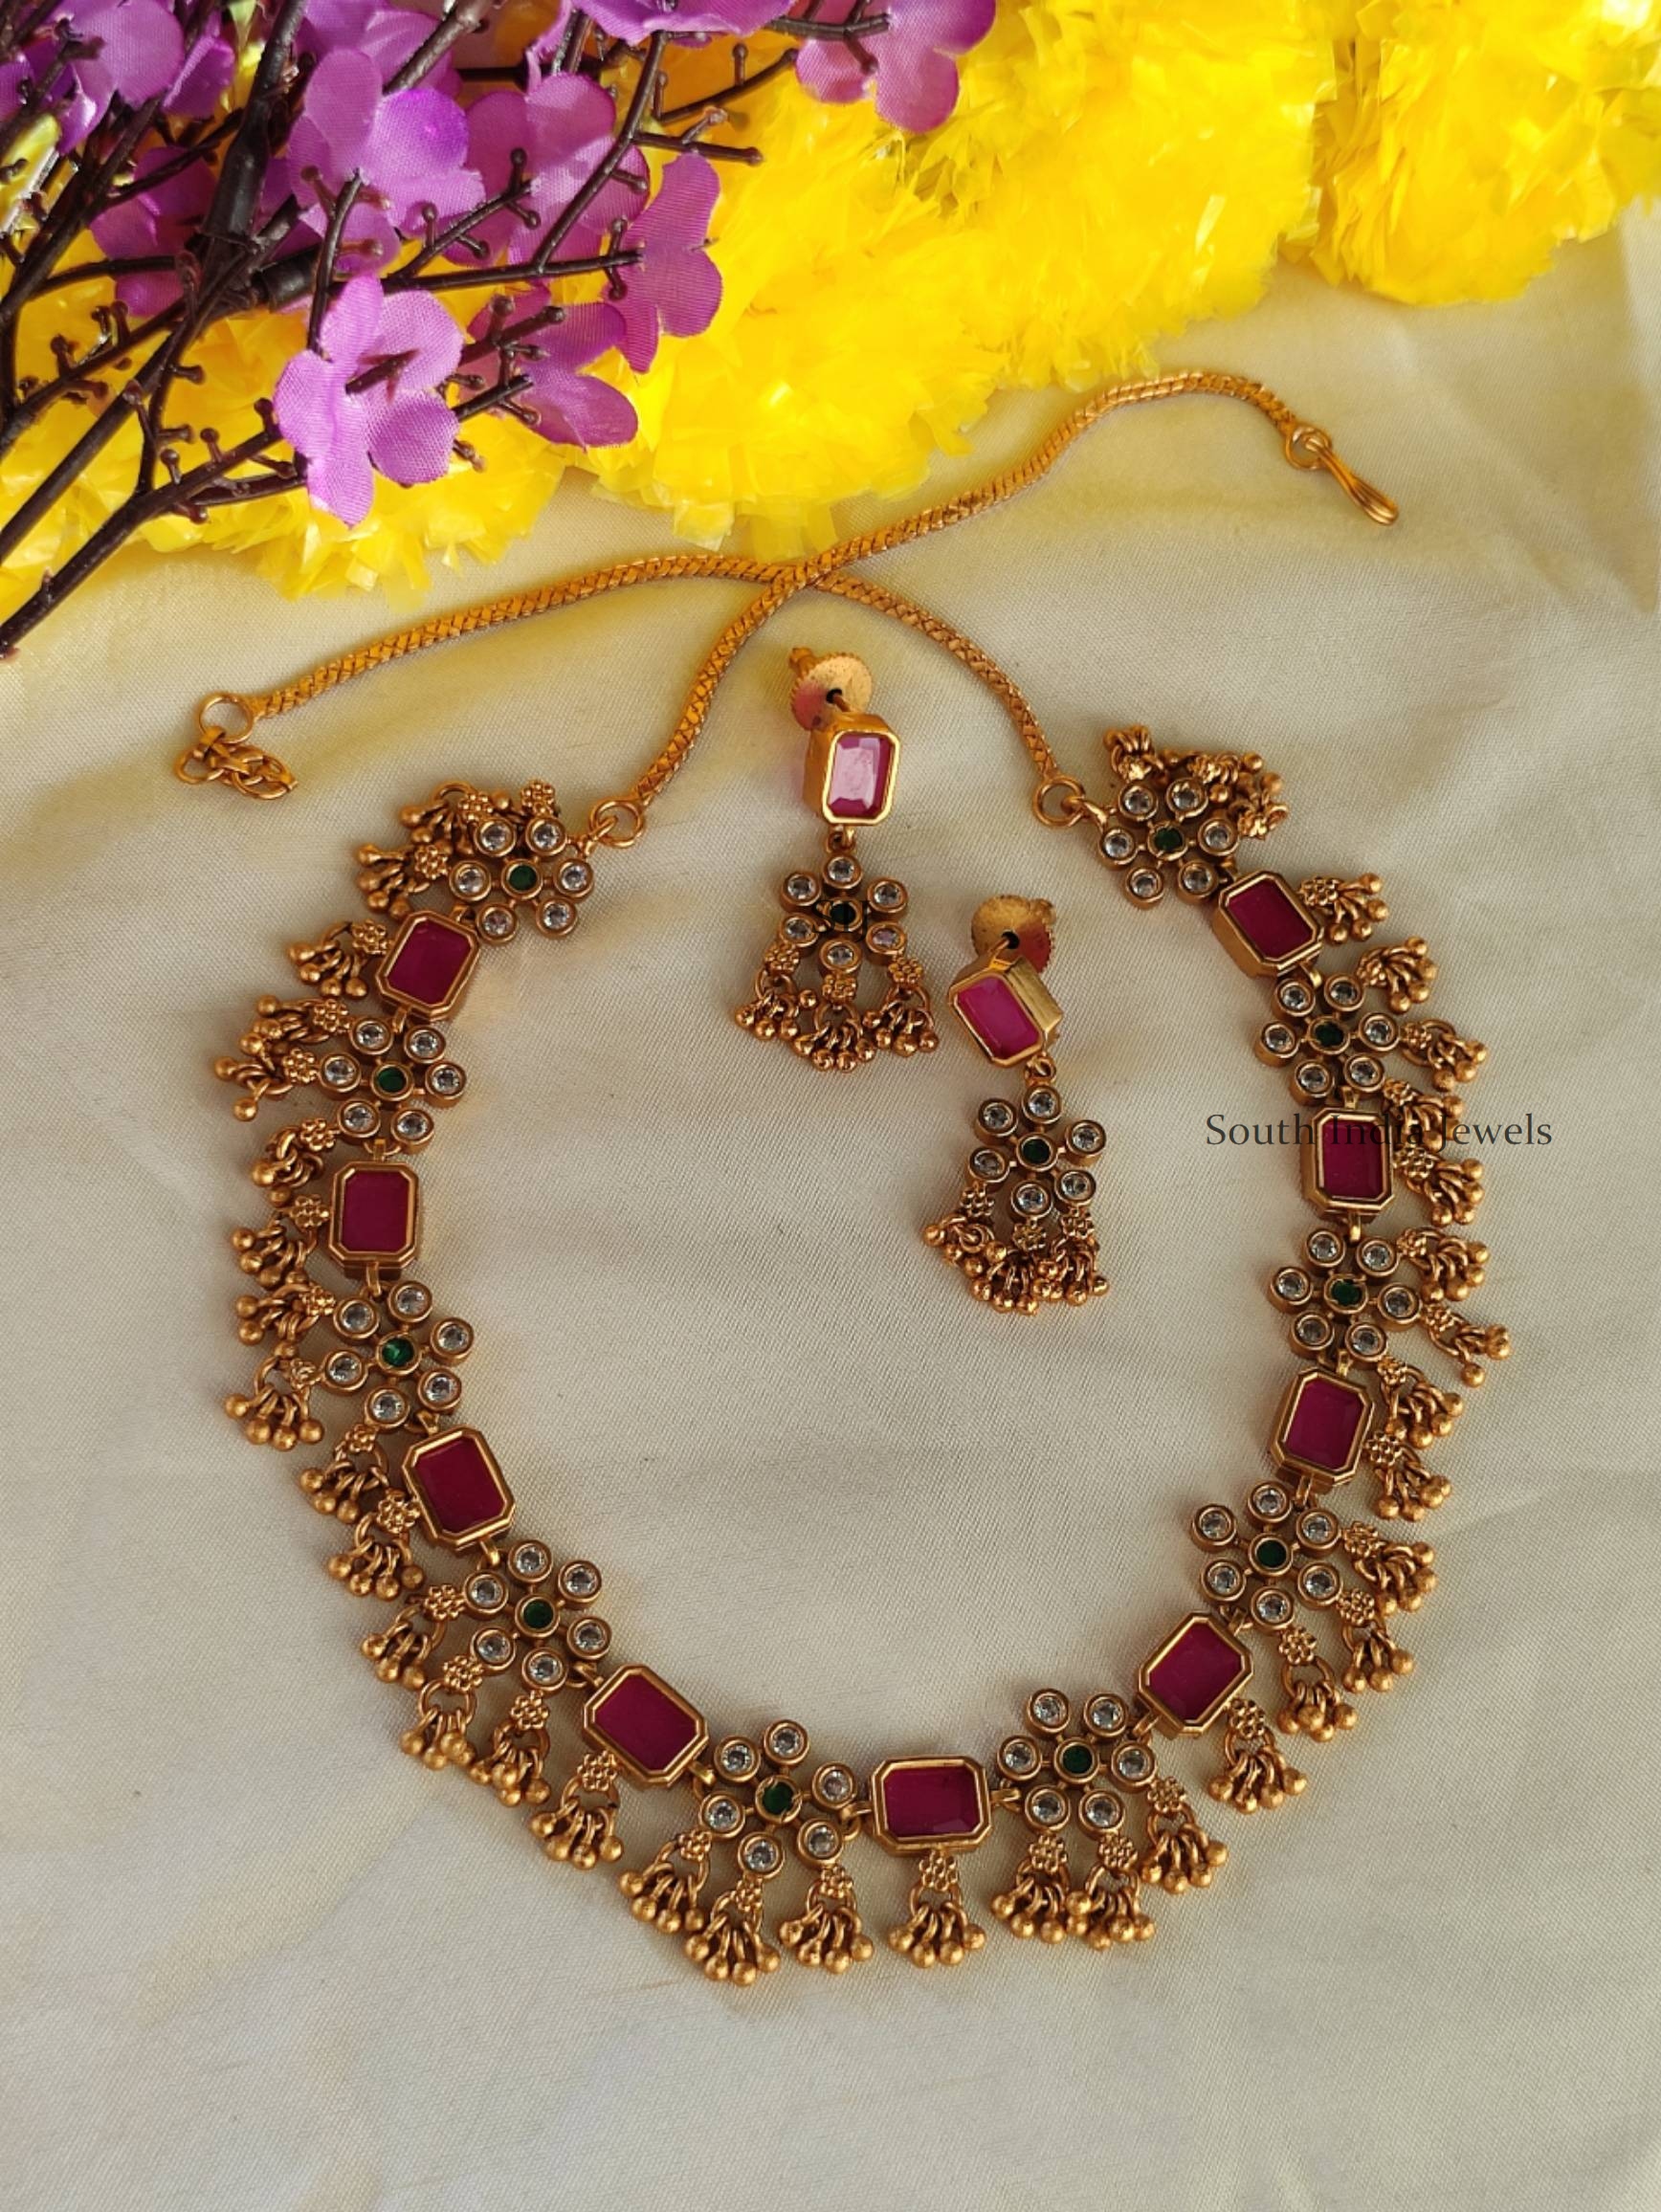 Adorable Lakshmi pearls design necklace with earrings. These are so trending jewelry products that are so gorgeous. Also shop more Trendy Lakshmi Pearl Necklace at South India Jewels Online Stores.